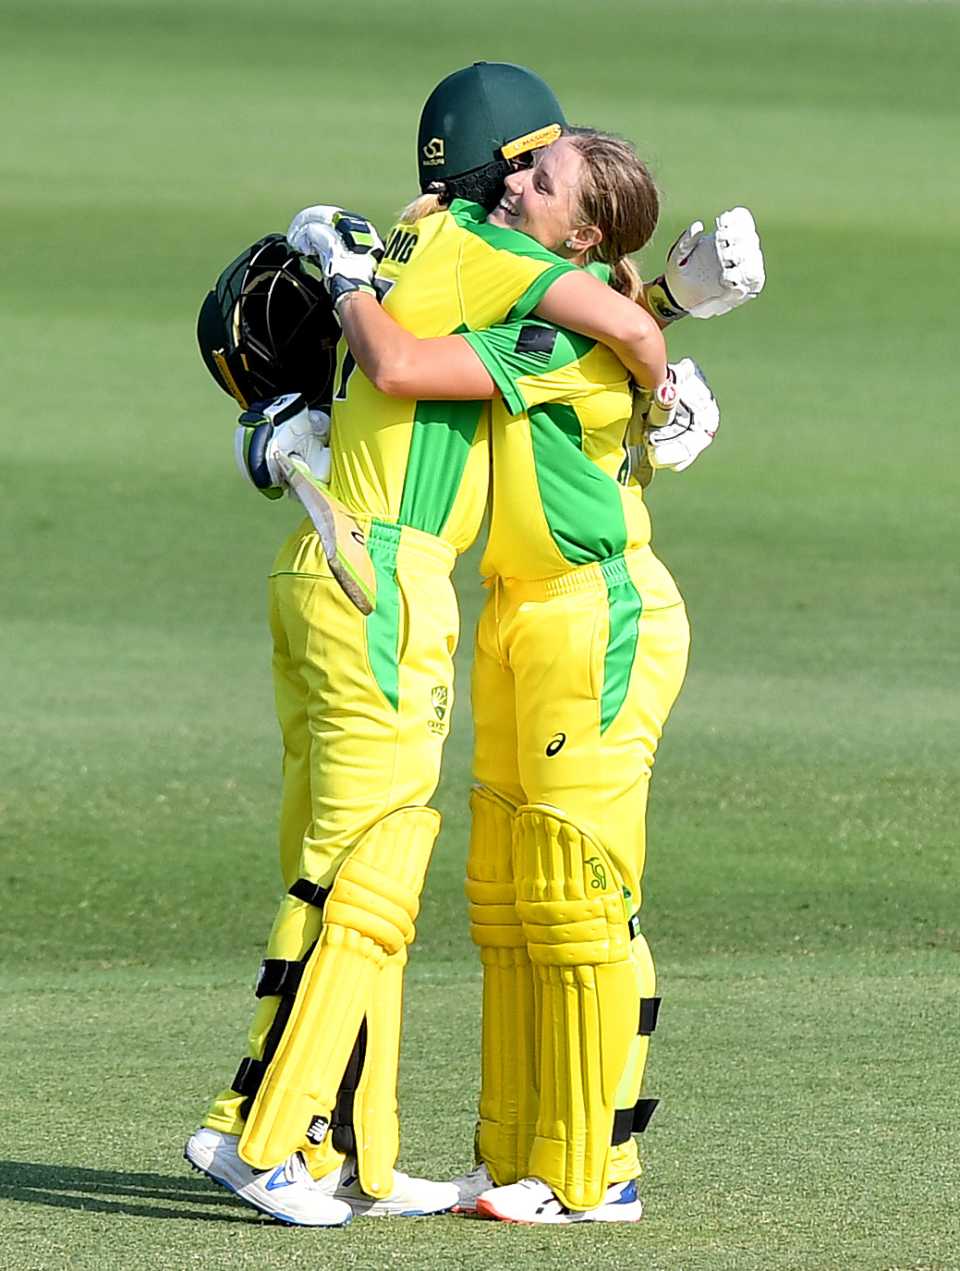 Alyssa Healy gets a hug from Meg Lanning after reaching her century